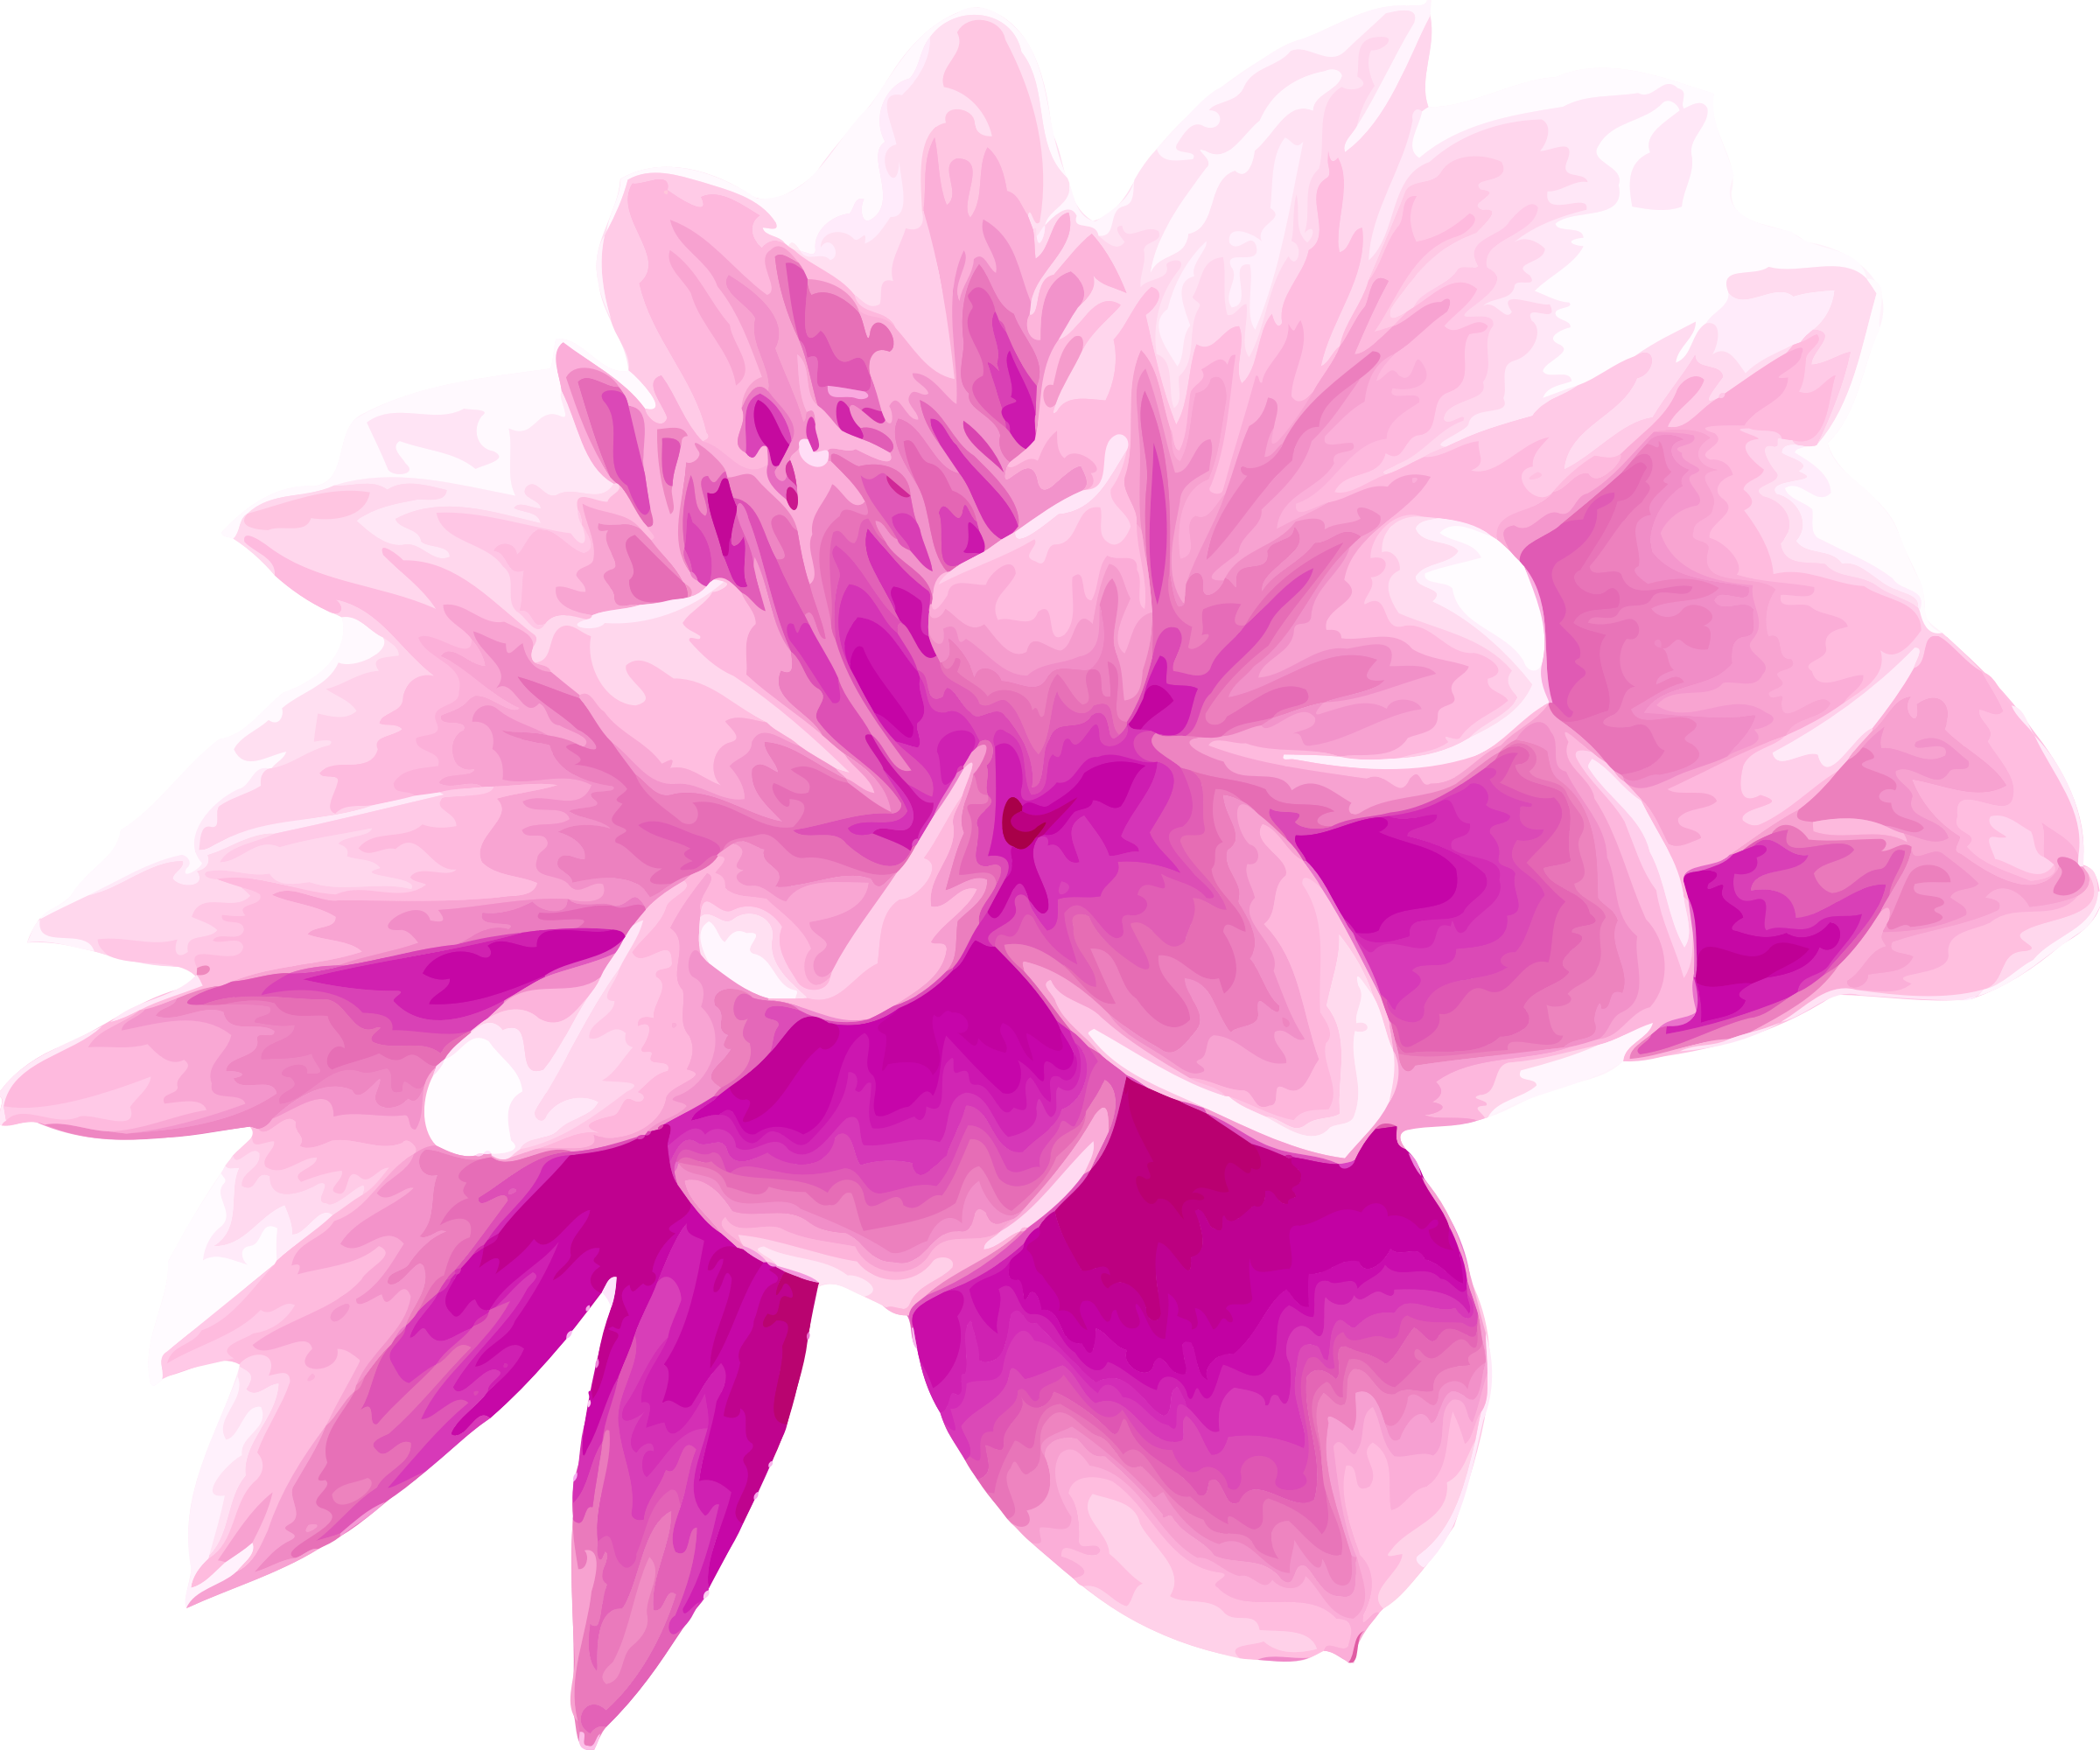 Pink Flower - Pink Colour Flower Png (2400x2000)